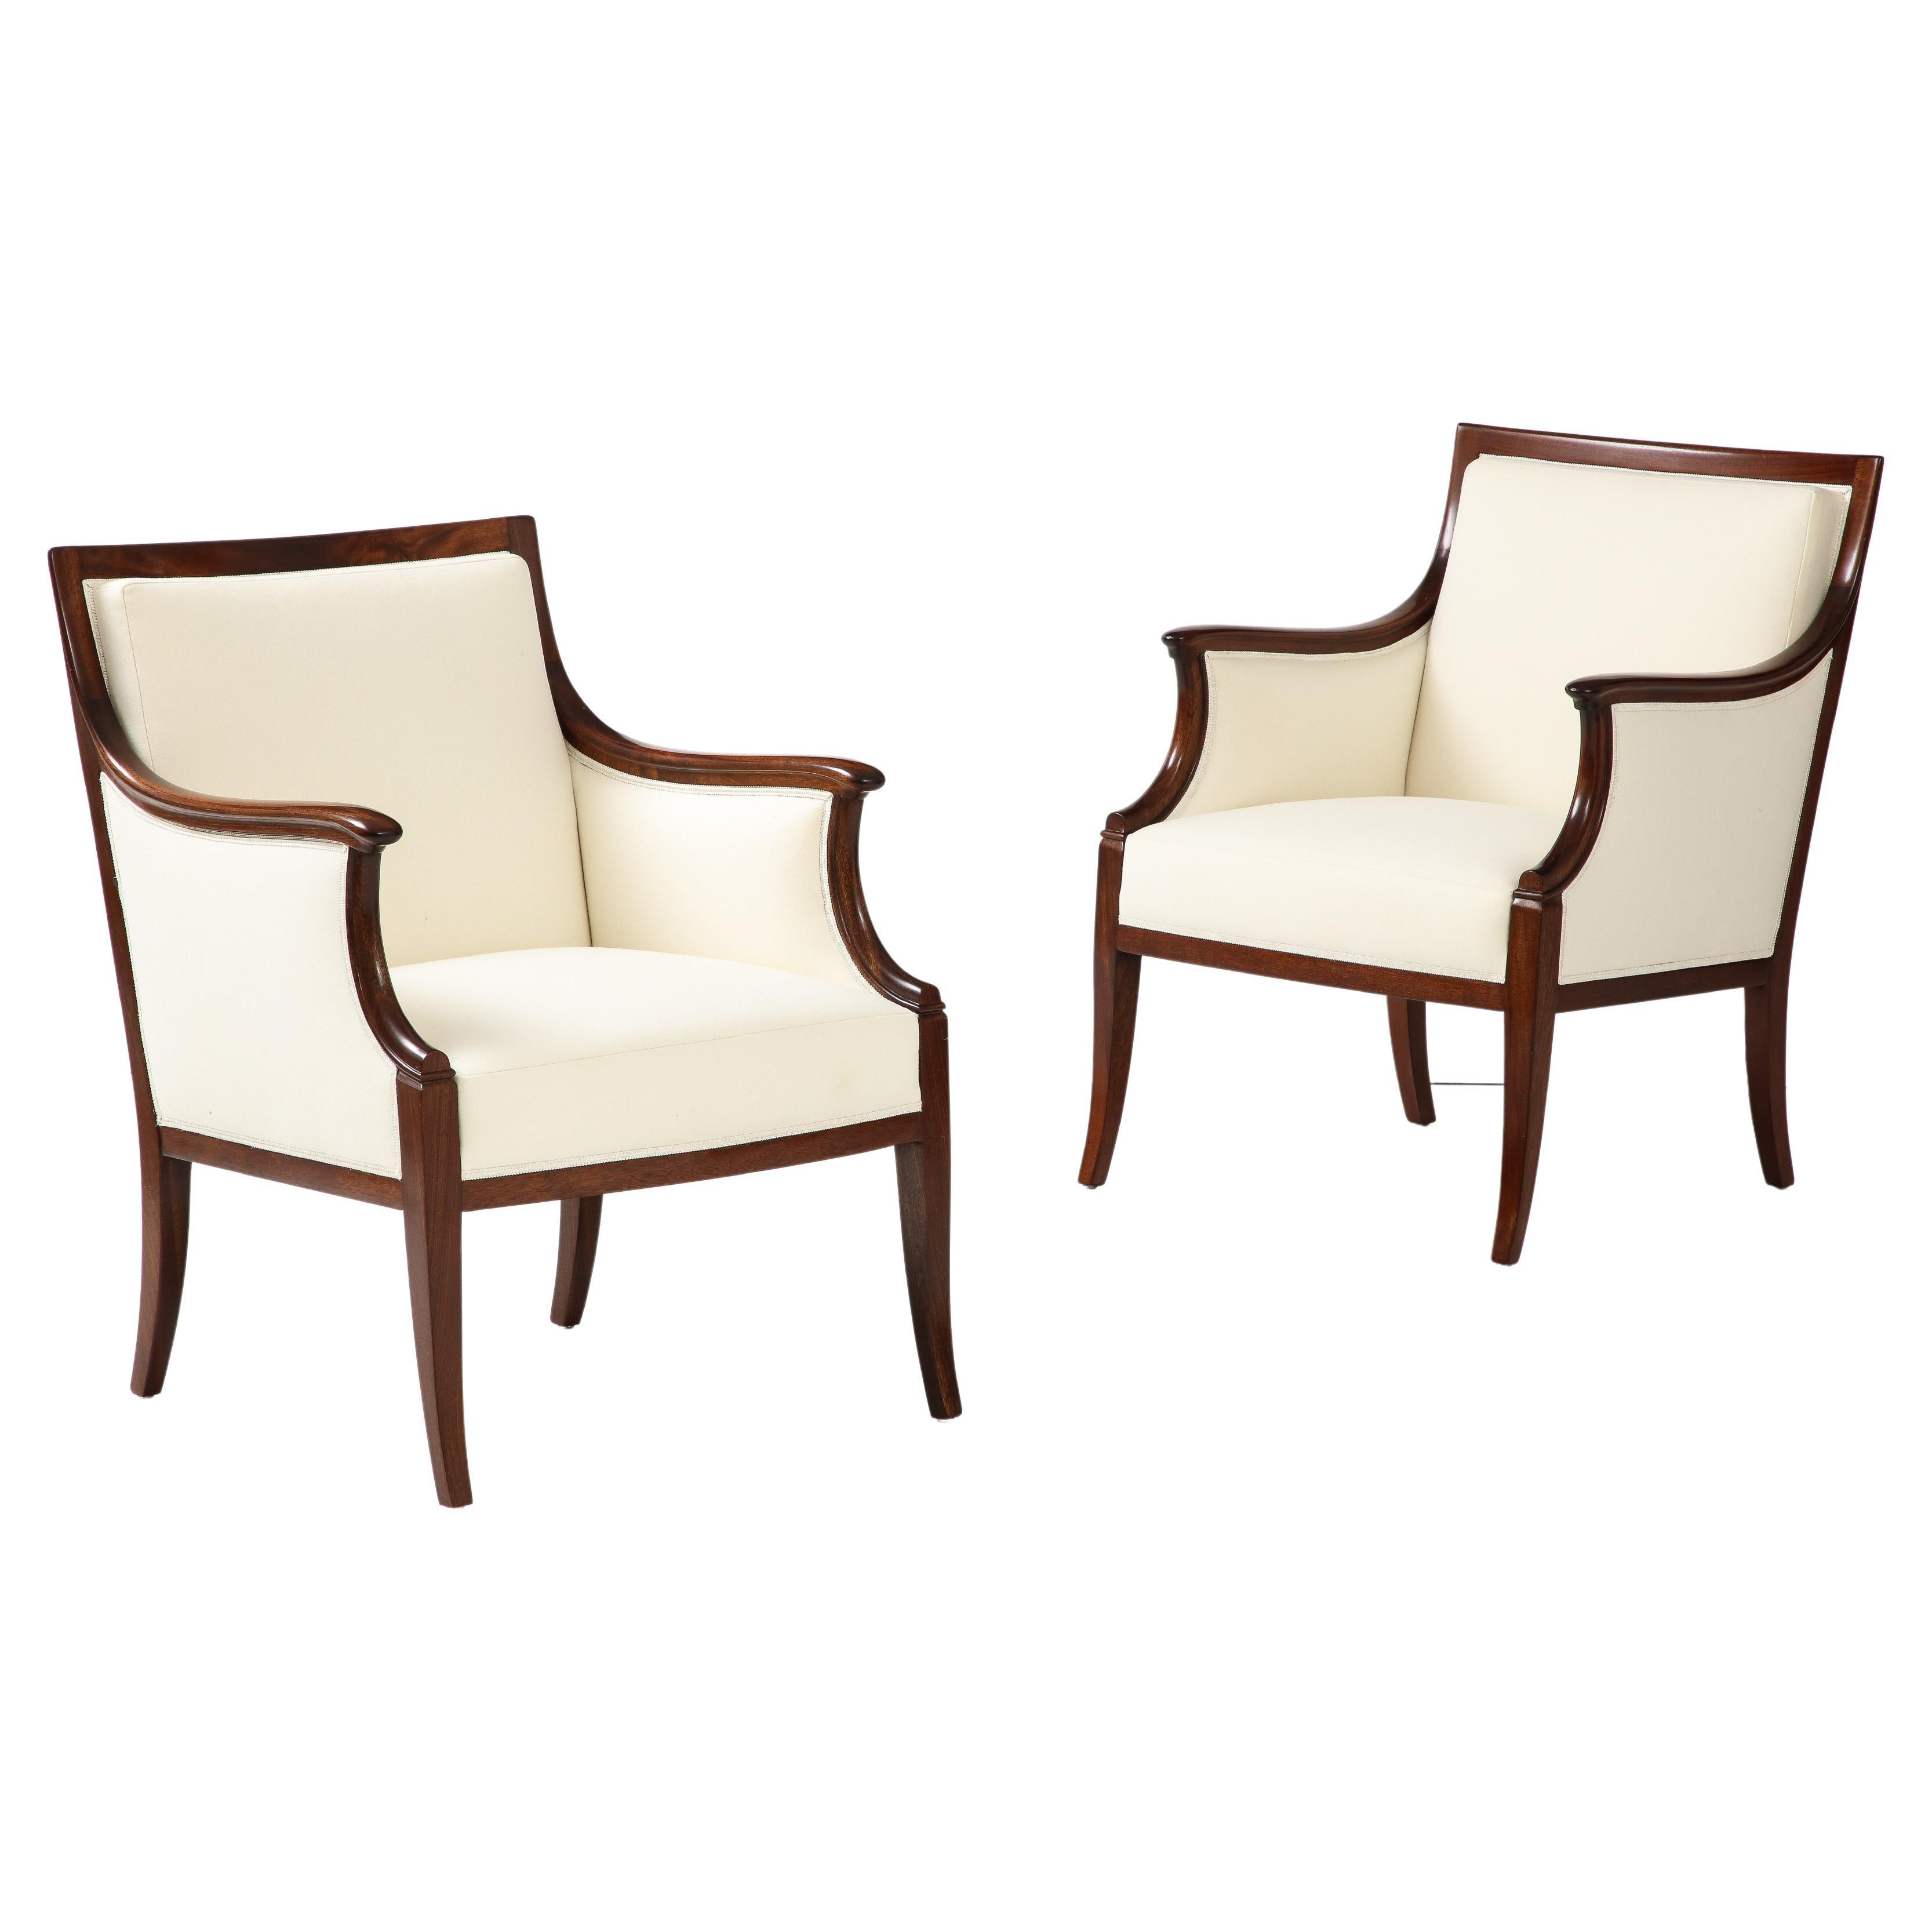 Pair of Frits Henningsen Mahogany Armchairs, circa 1940s For Sale